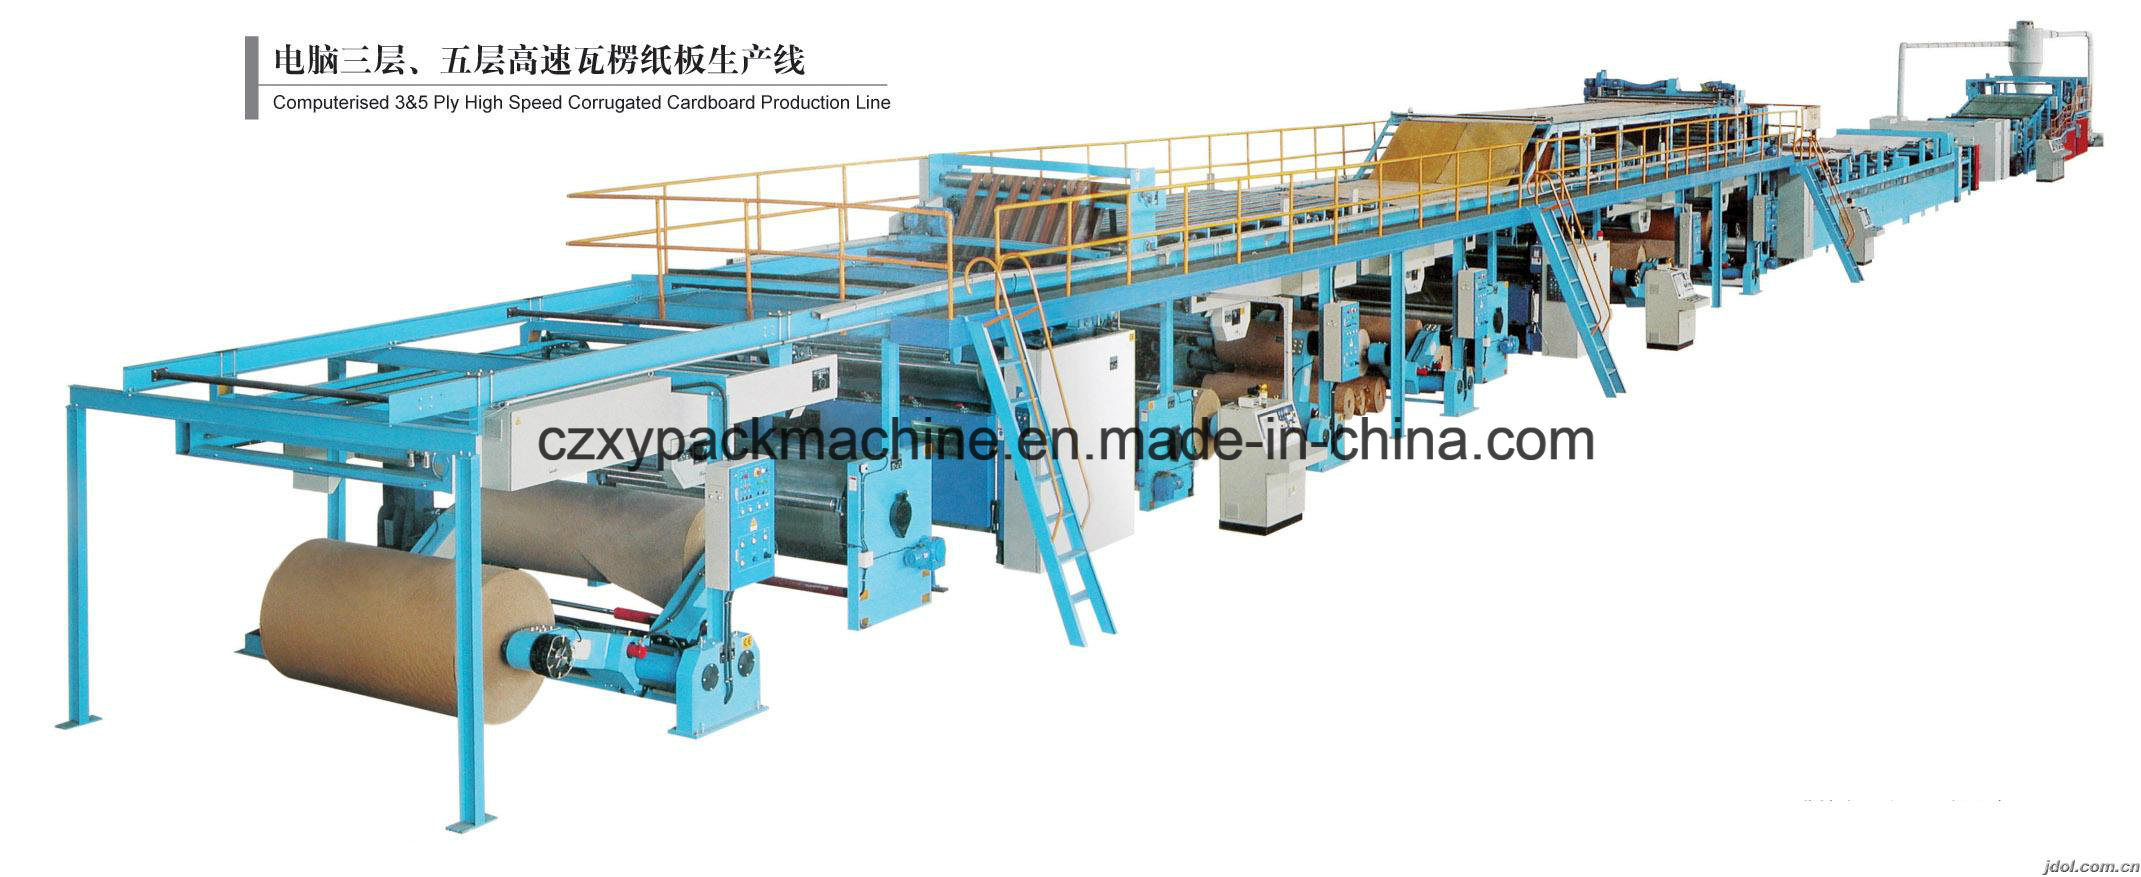 2017 New Type Corrugated Cardboard Production Line